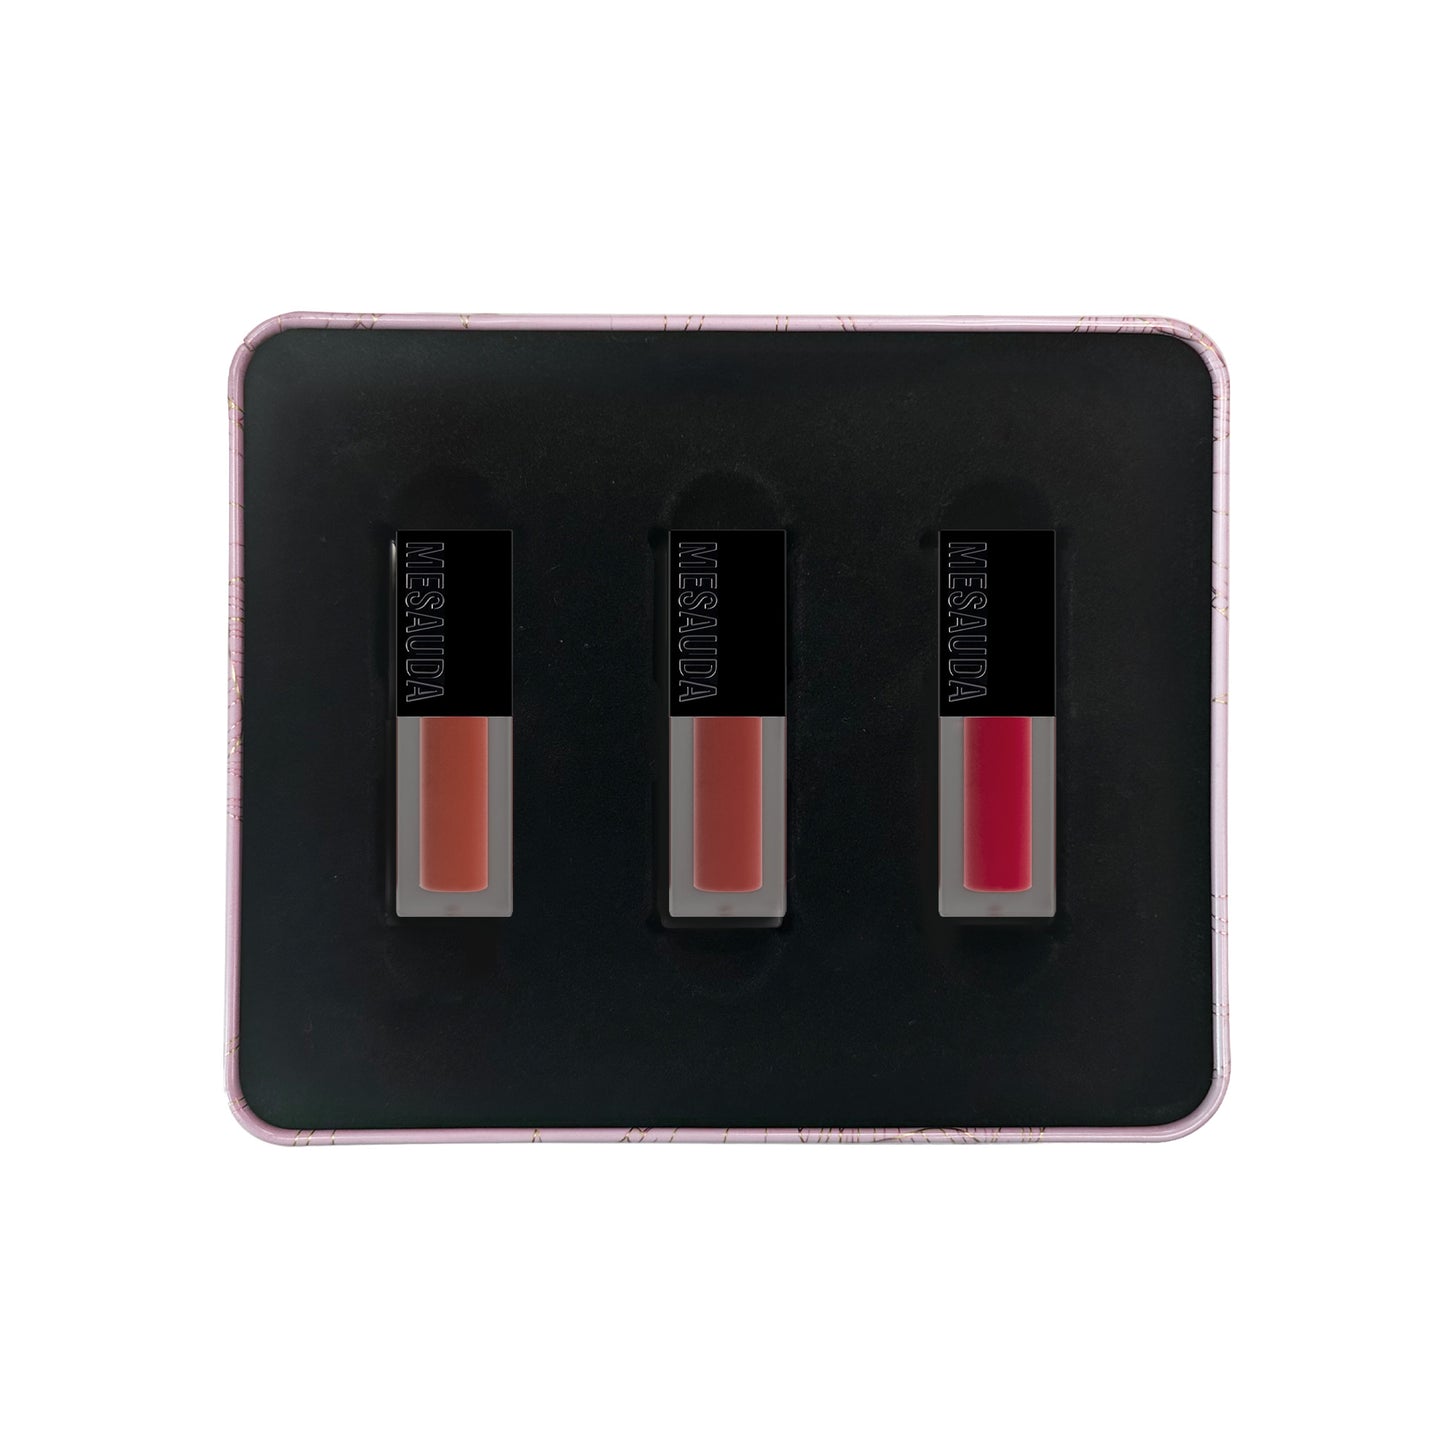 MATTE COUTURE - GIFT SET